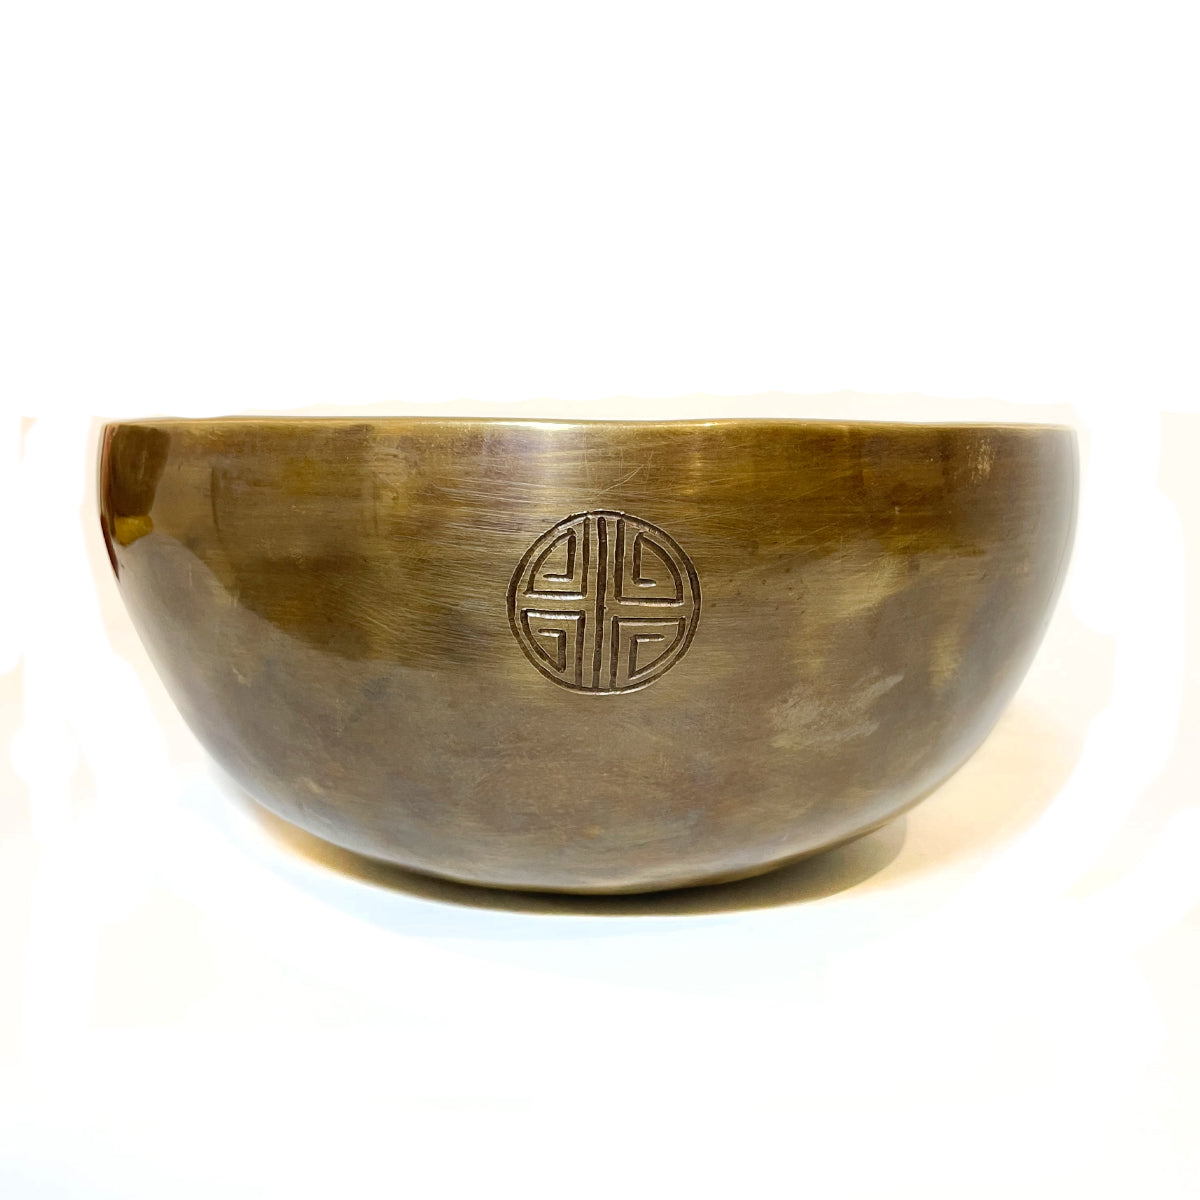 Hand Hammered Full Moon Nepal Healing Therapy Singing Bowl 20cm